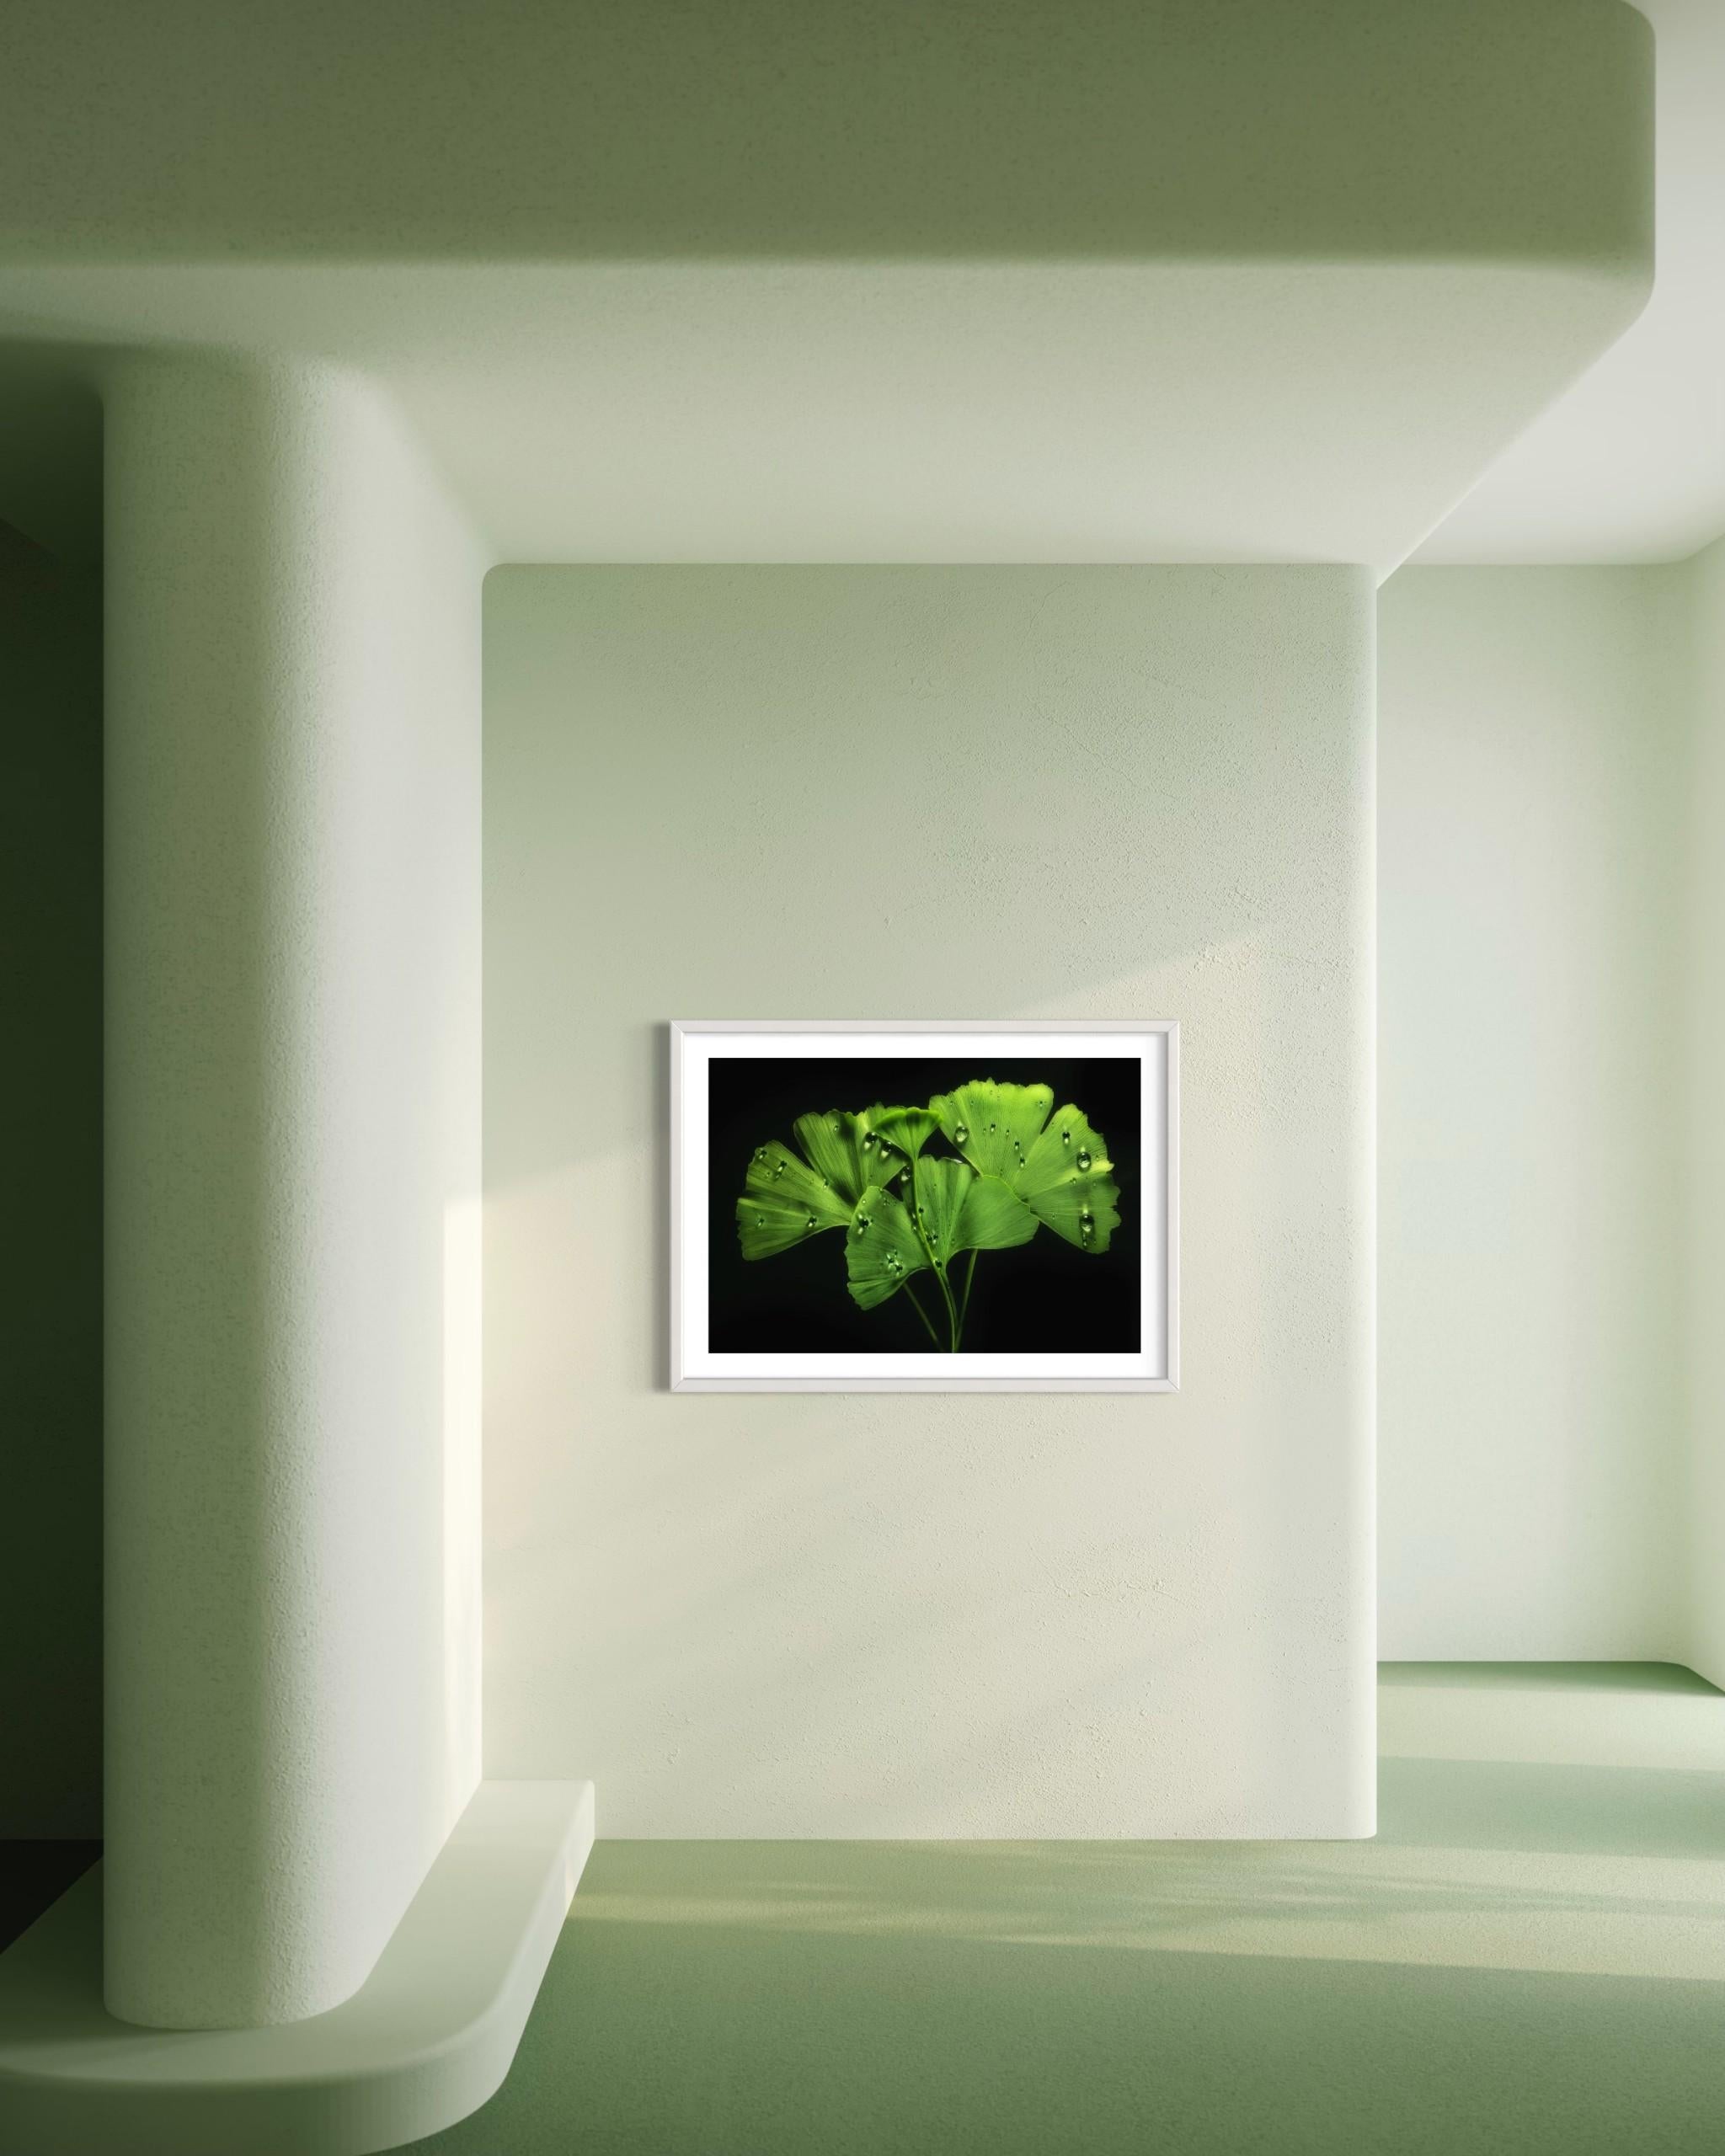 Ginko Biloba No. 1, floral photography, limited edition print, green art For Sale 2